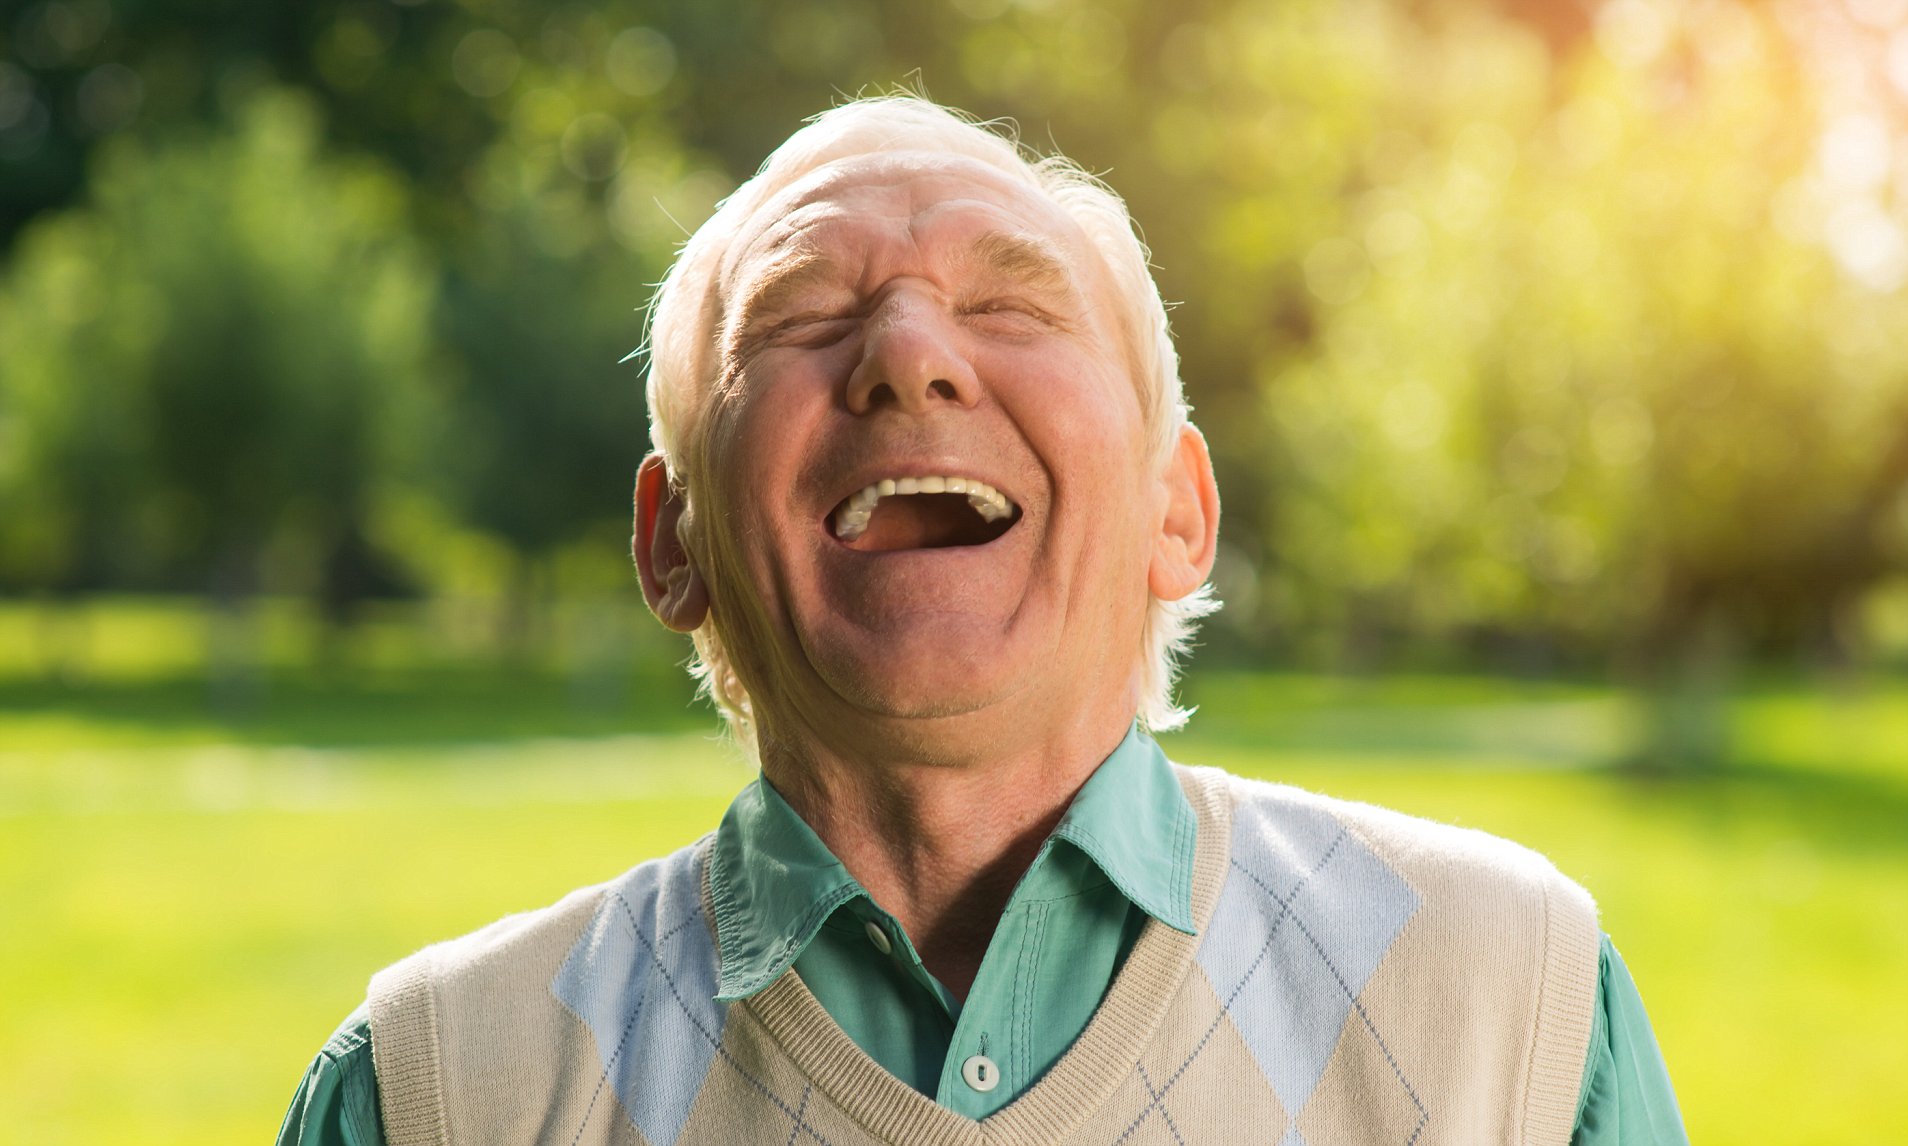 Elderly man laughing. Senior male on nature background. Wonderful mood every day. Can't restrain the laughter.; Shutterstock ID 507825094